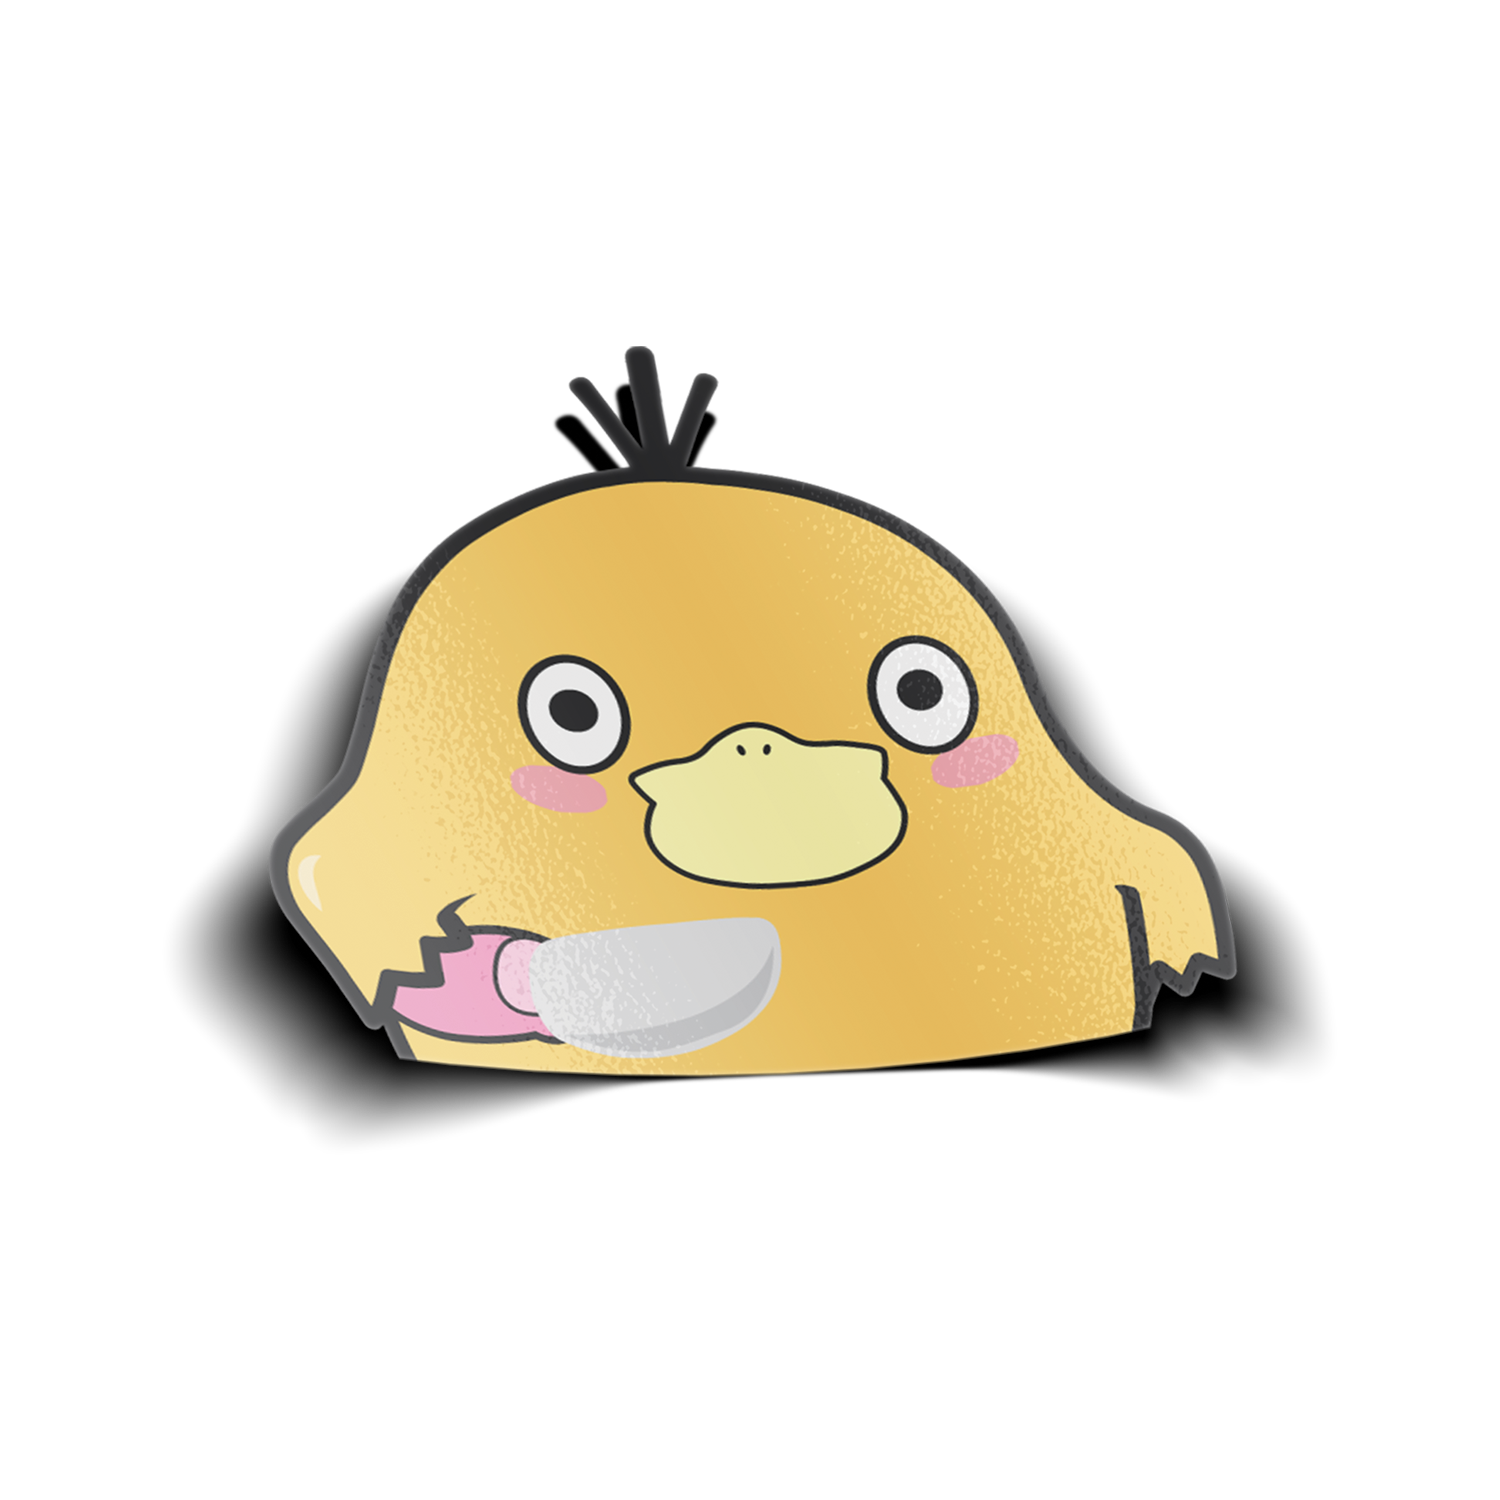 Psyduck with Knife Air Sticker design includes Pokemon Psyduck holding a knife in a peeking-over style.